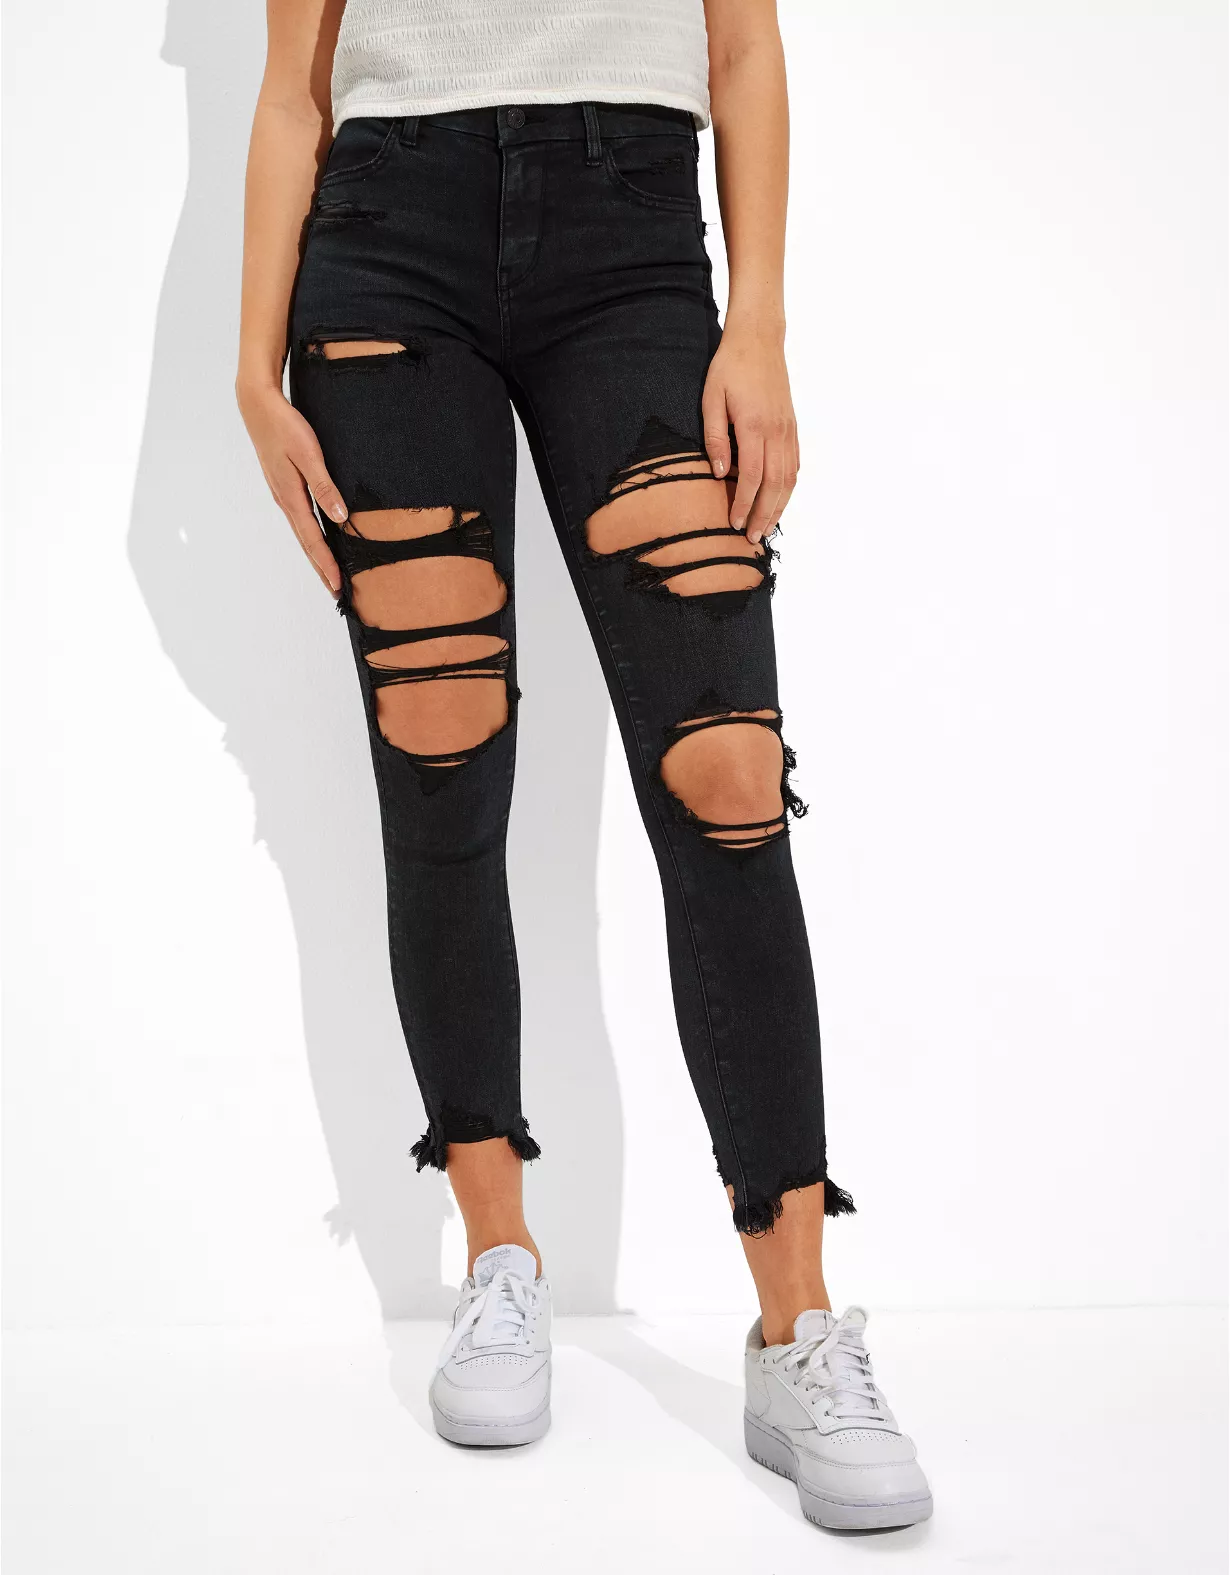 Abnormaal Aanzienlijk Zonnebrand AE Forever Soft Ripped High-Waisted Jegging Crop